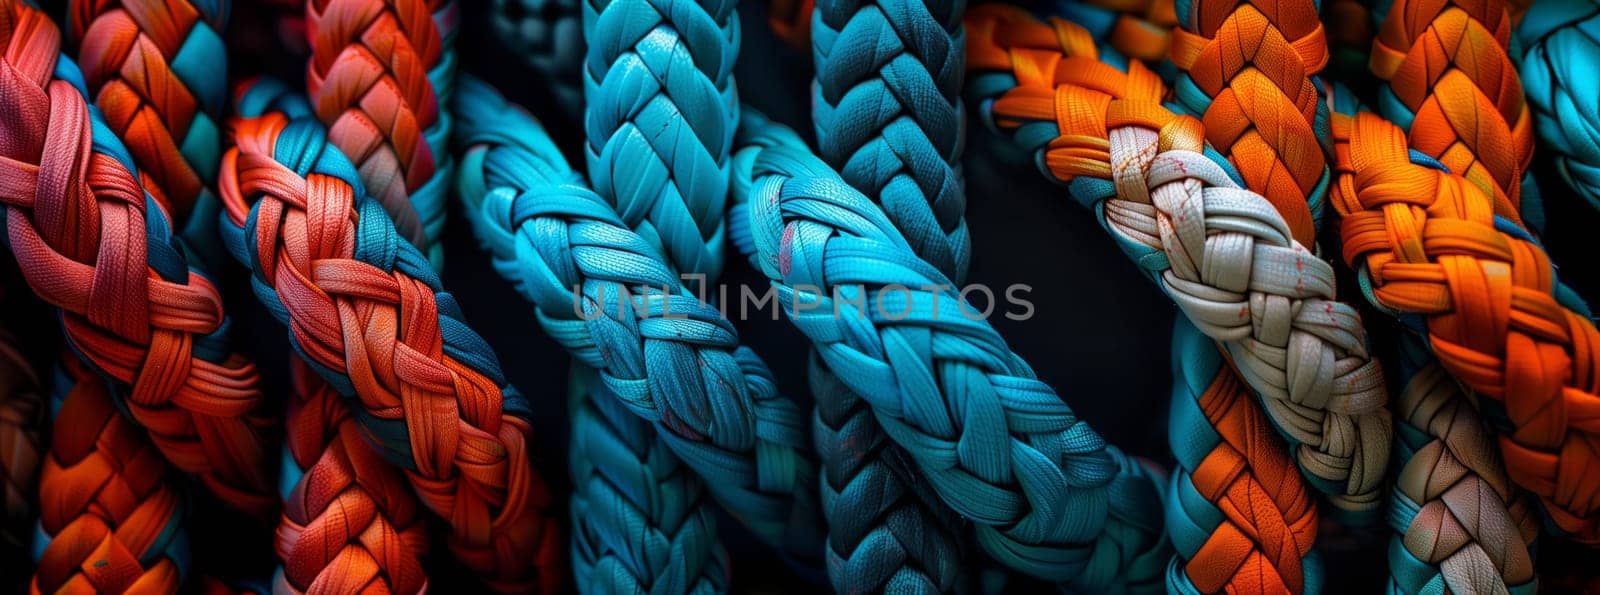 Vibrant textile ropes in electric blue, magenta, and more hanging together by richwolf